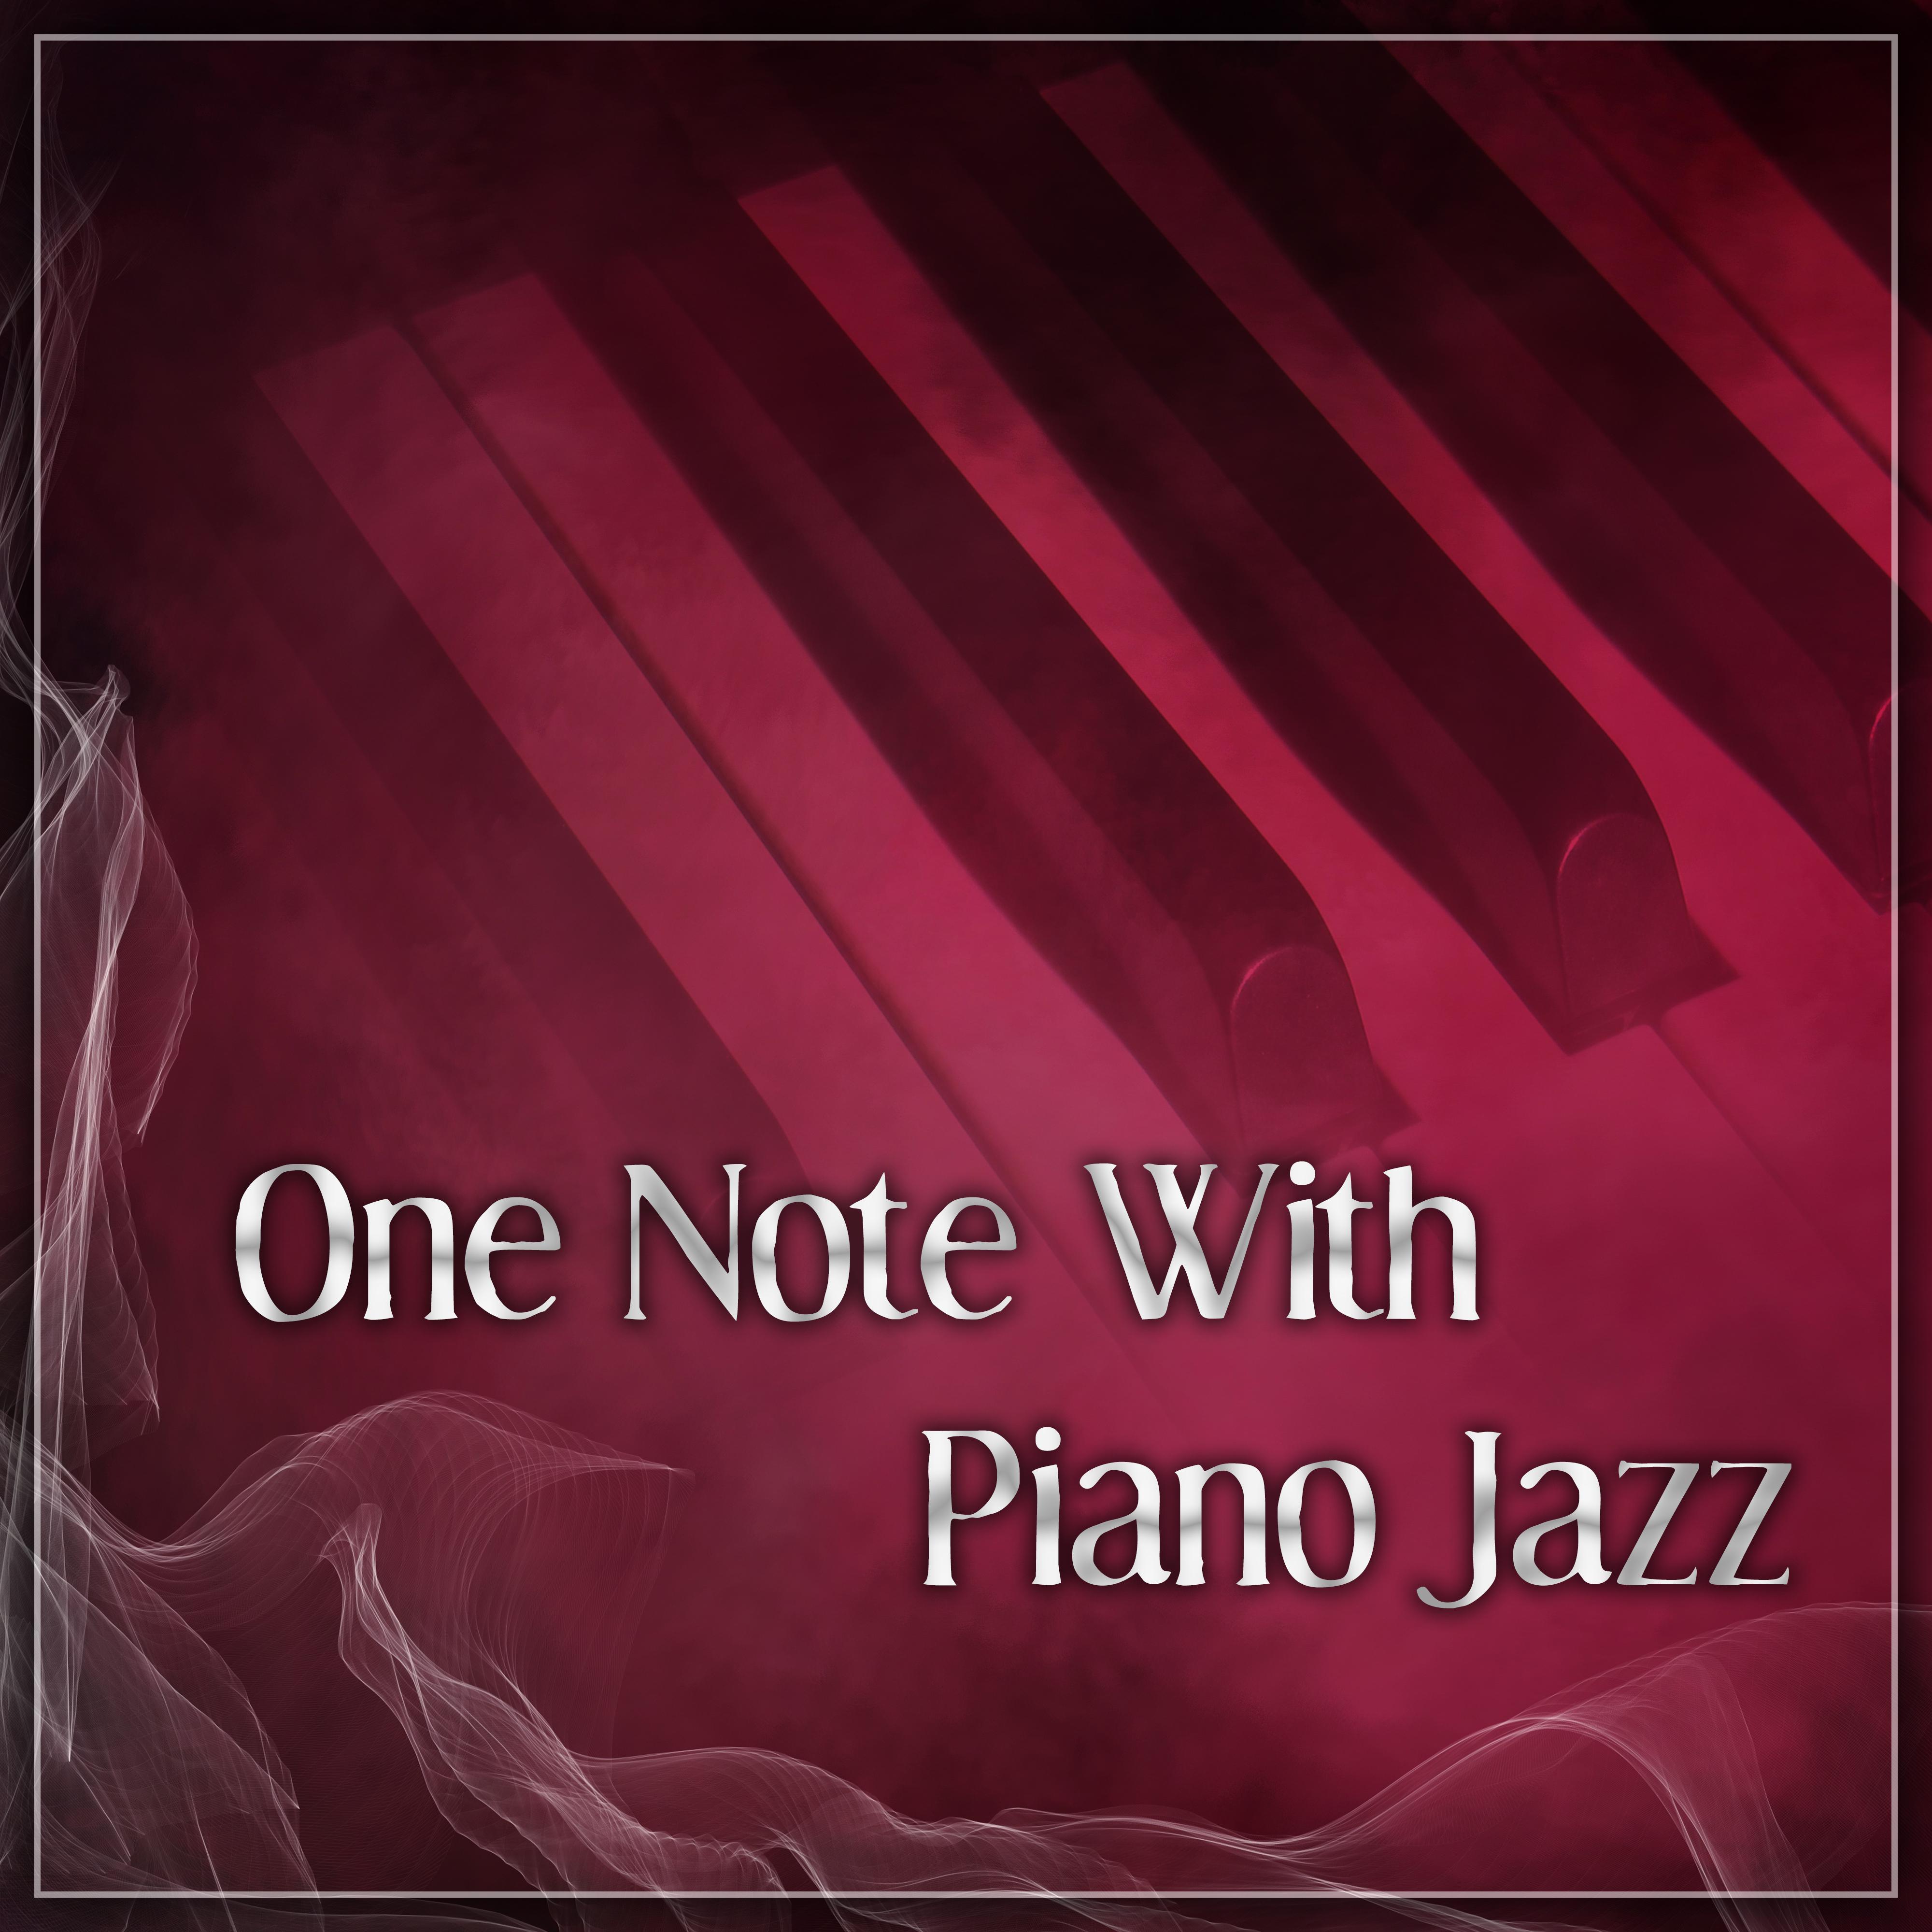 One Note With Piano Jazz – Beautiful Piano Bar, Finest Lounge Music, Best of Smooth Jazz, Morning Coffee